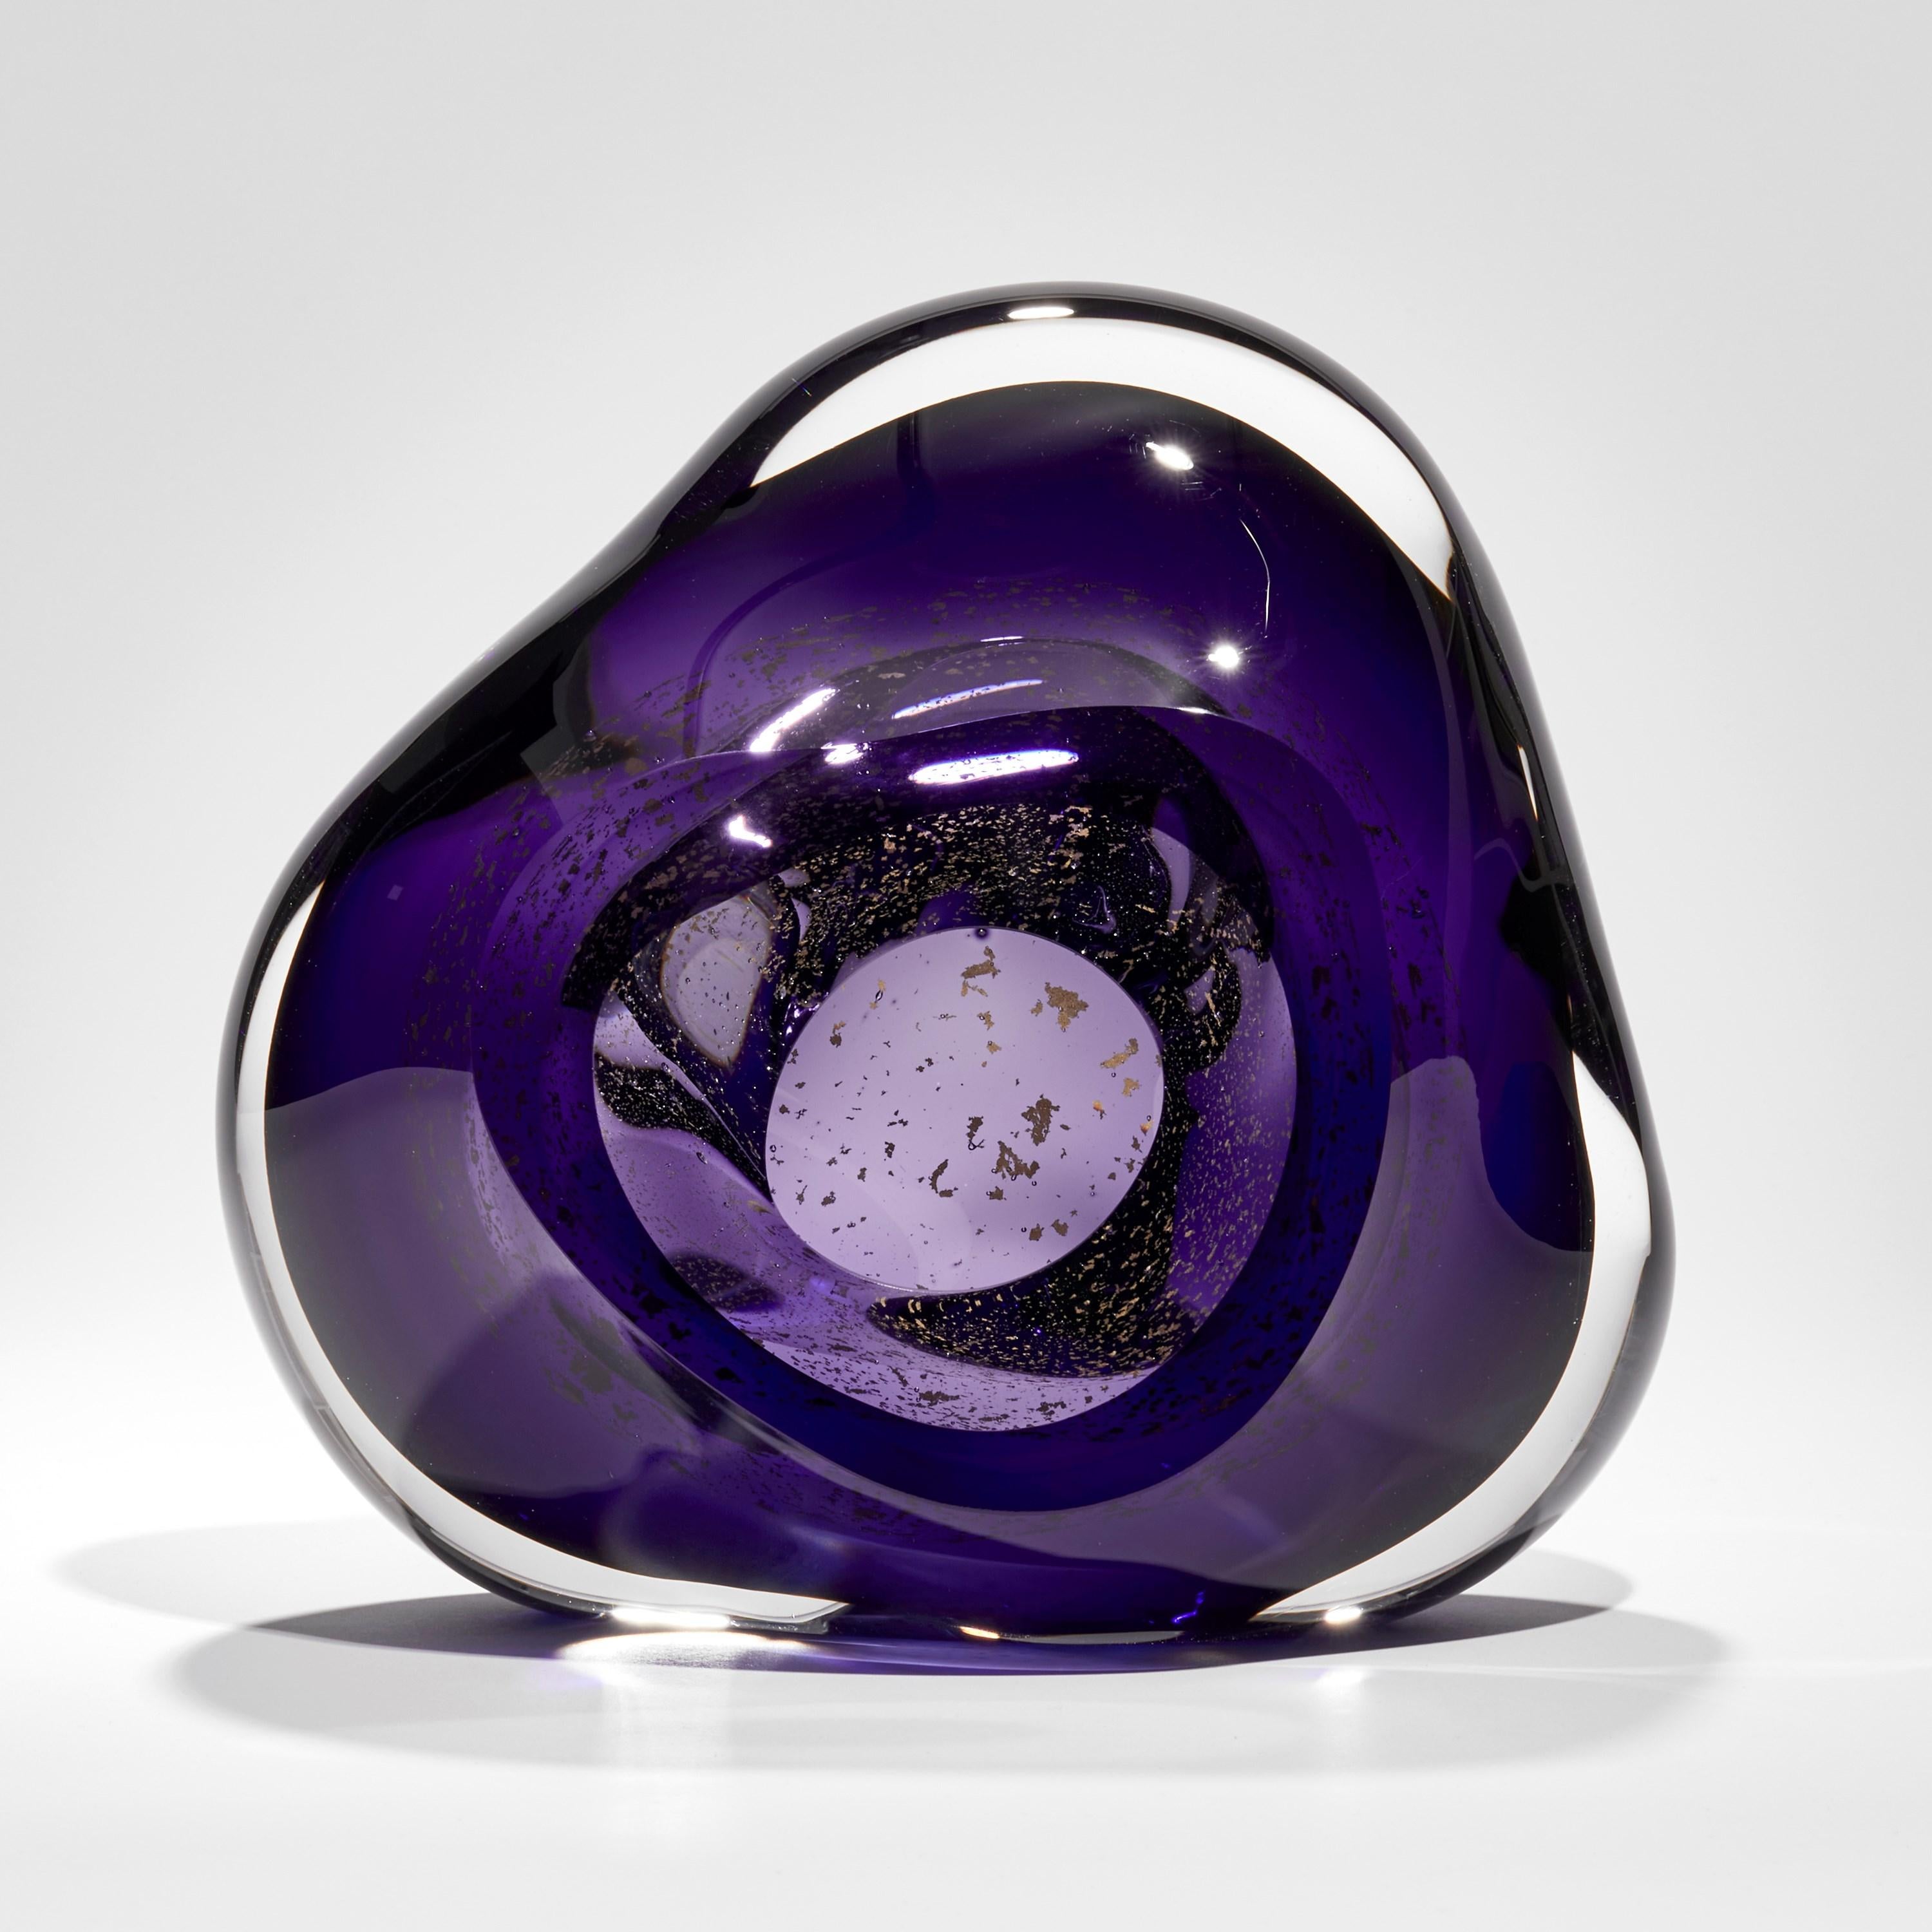 'Oro Vug in Purple I' is a unique handblown glass sculpture by the British artist, Samantha Donaldson. Created from layers of clear and rich purple coloured glass with 24 carat gold leaf, these elements merge creating the illusion of swirling gold